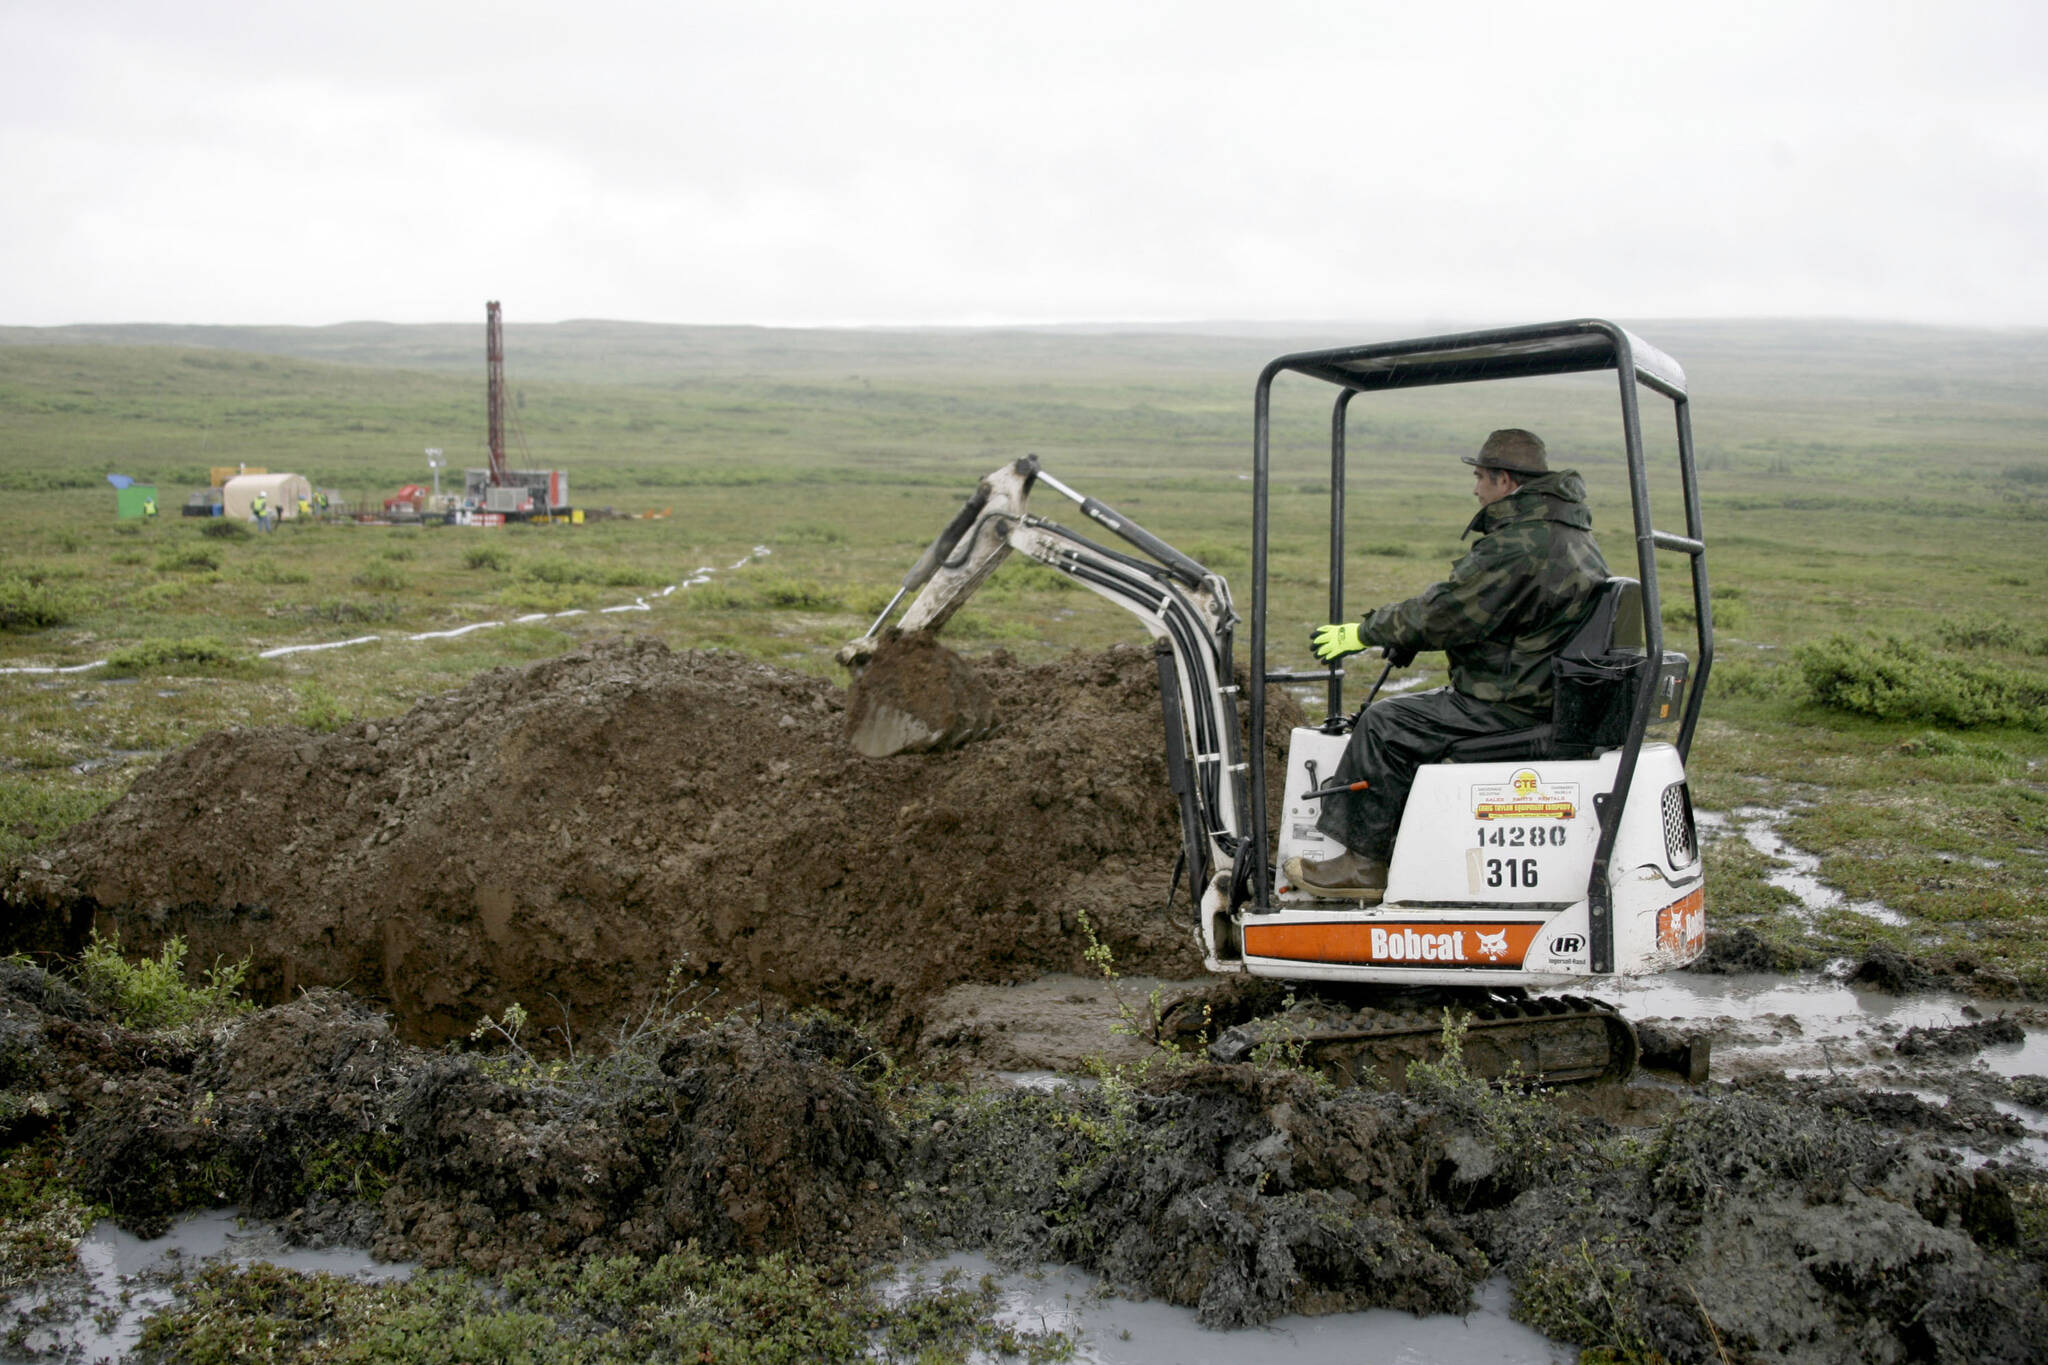 A worker with the Pebble Mine project digs in the Bristol Bay region of Alaska near the village of Iliamma, Alaska, July 13, 2007. The U.S. Environmental Protection Agency announced a decision Tuesday, Jan. 31, 2023, that would block plans for the proposed Pebble Mine, a copper and gold project in southwest Alaska. (AP Photo / Al Grillo)